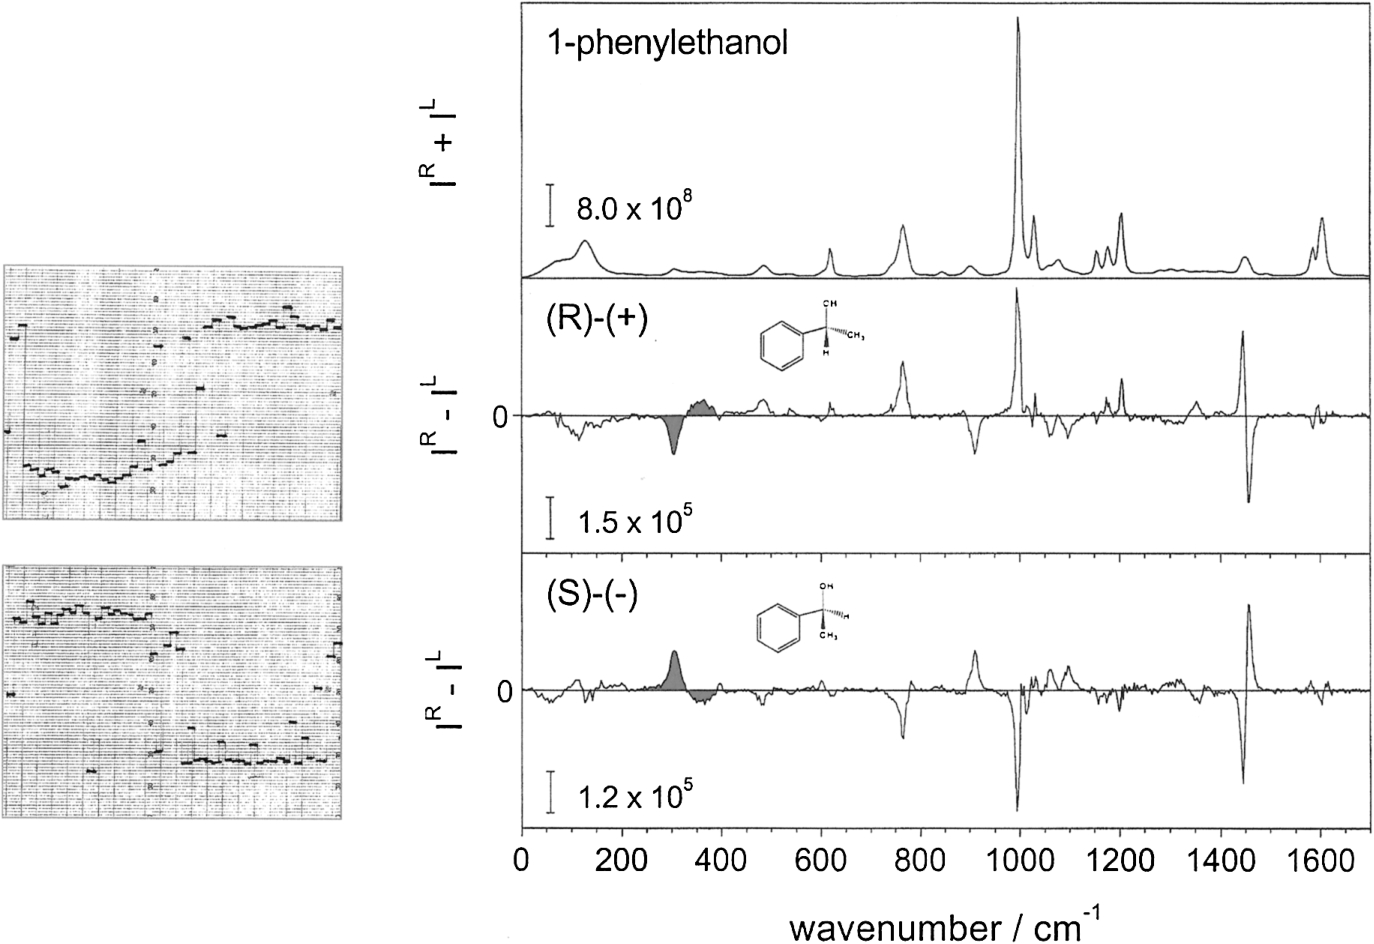 The original 1972 ICP ROA chart recorder traces in the spectral region ∼290–400 cm−1 for the two enantiomers of 1-phenylethanol (left), compared with ICP spectra recorded on a multichannel instrument in 2003 (right) in which the same couplets (shaded) as in the original report are reproduced.